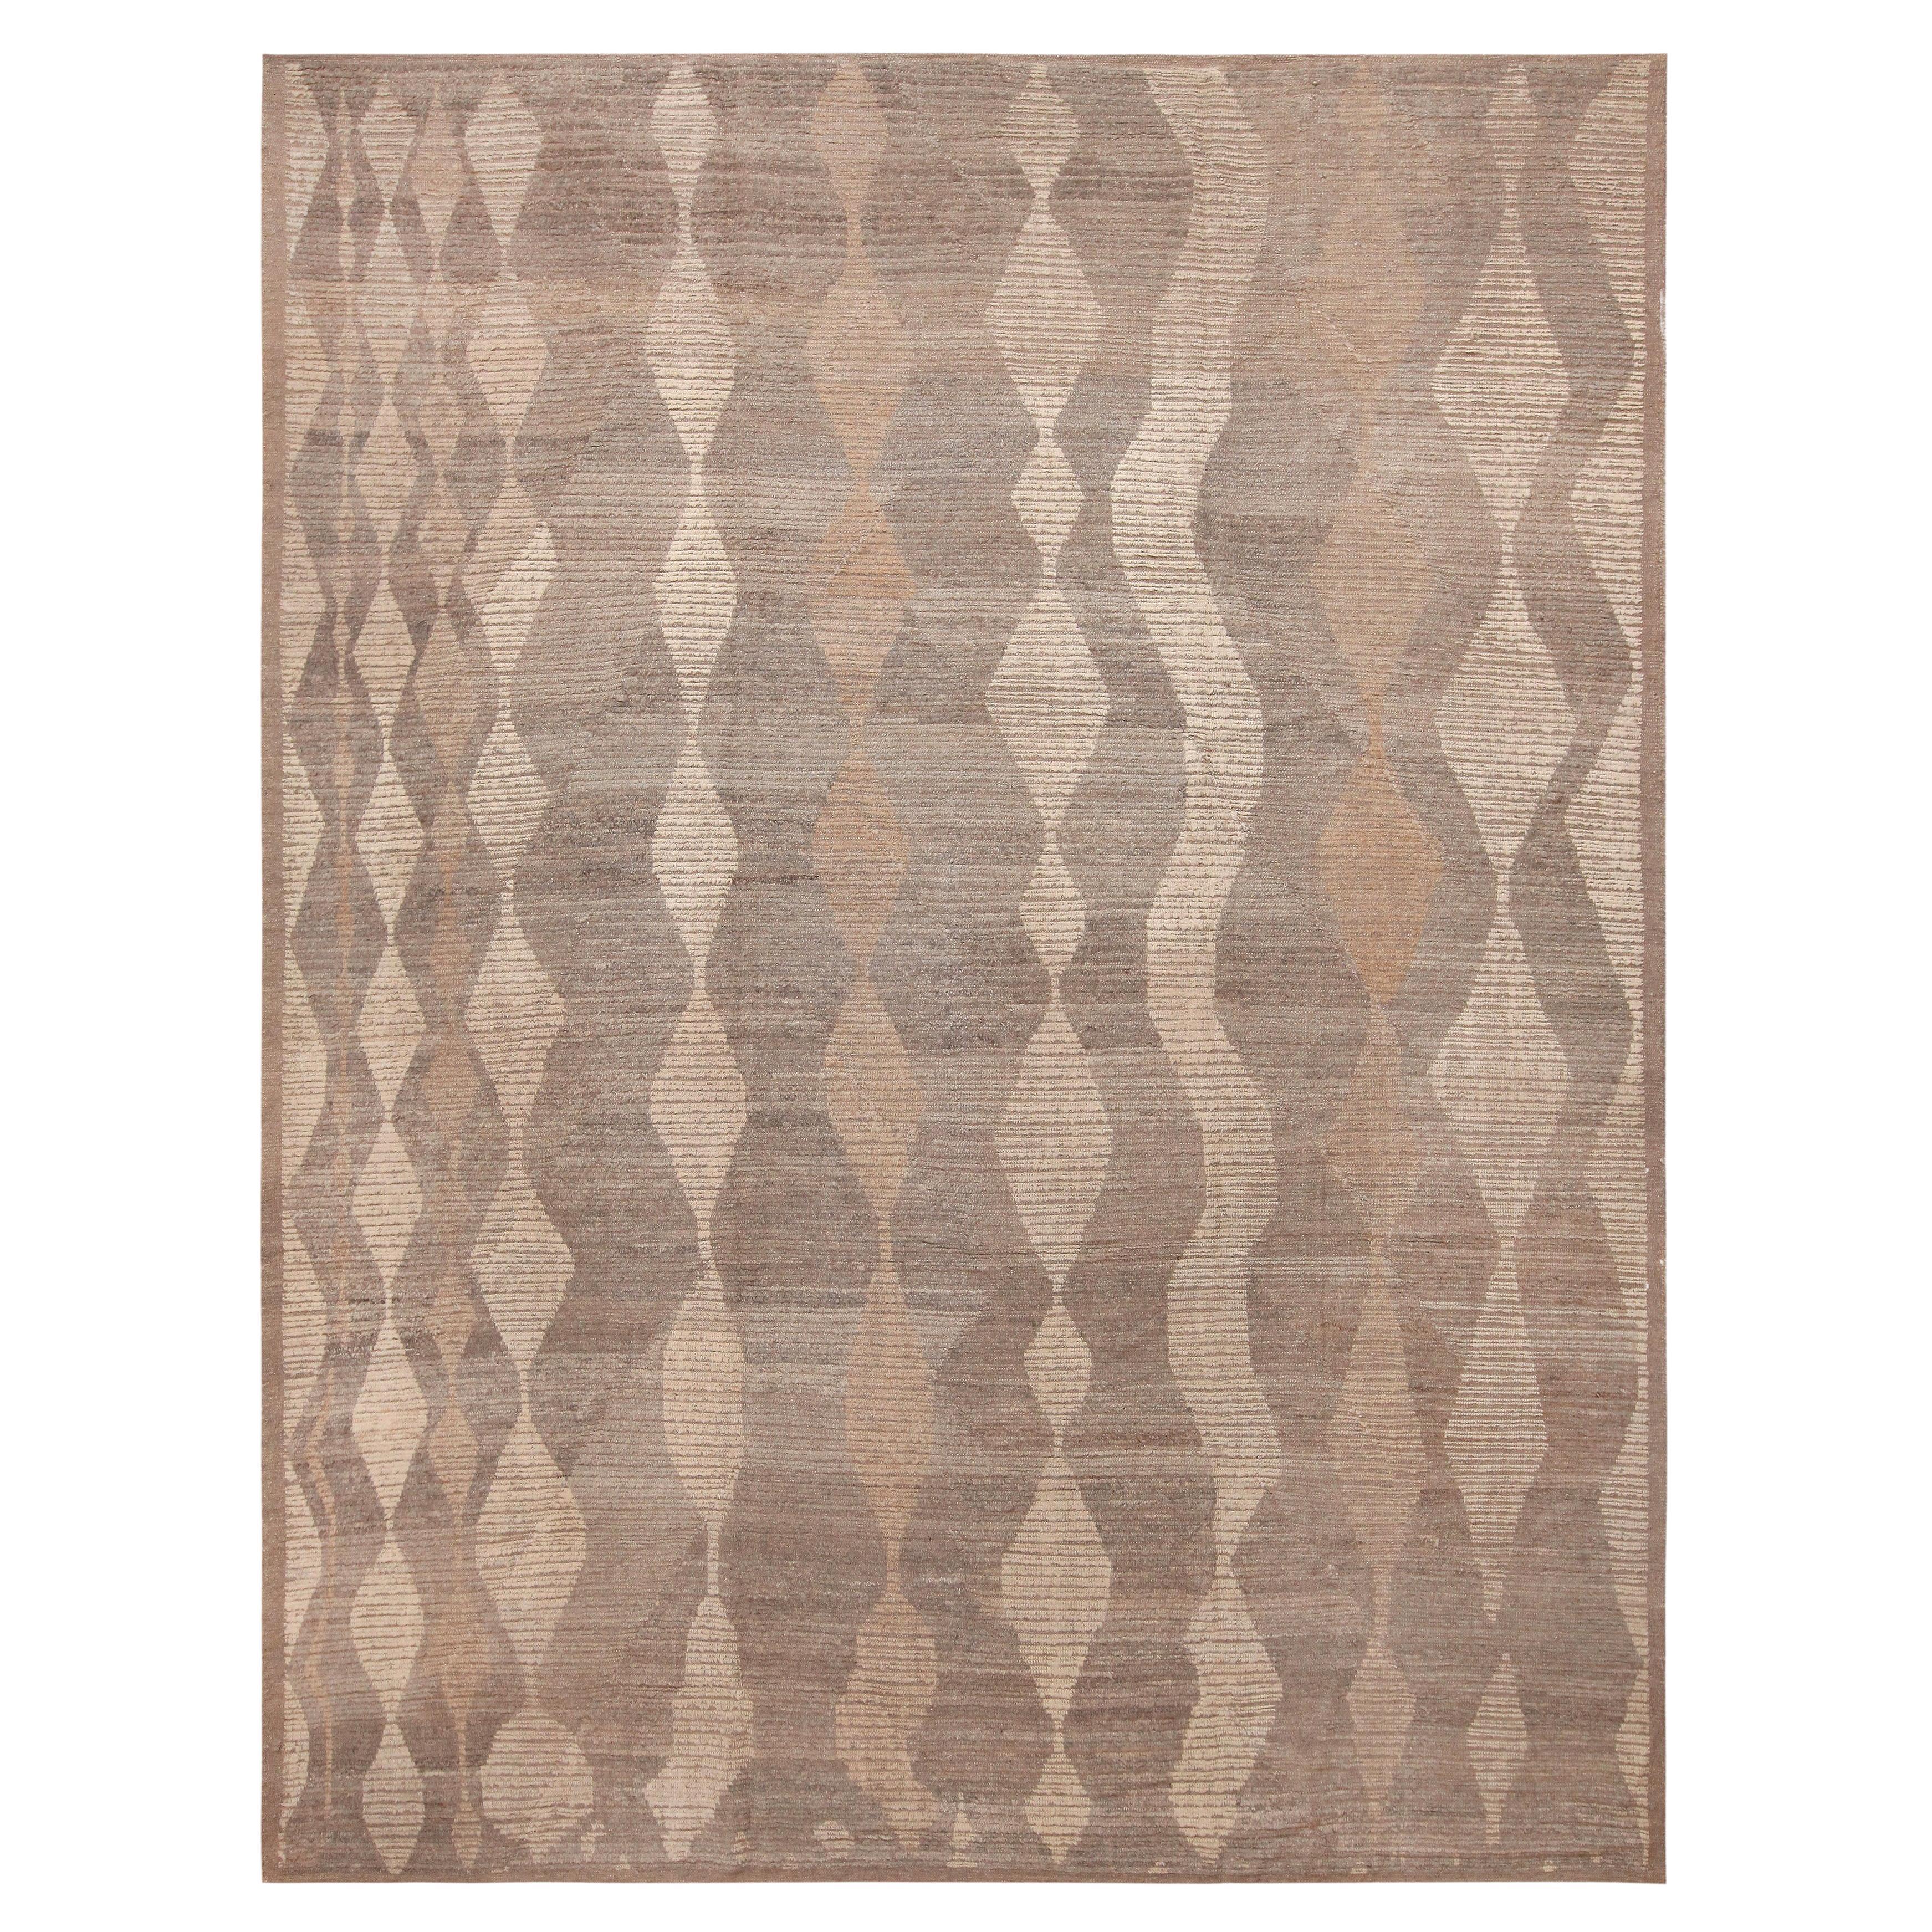 Nazmiyal Collection Chic and Stylish Modern Brown Tones Area Rug 10'7" x 13'7"